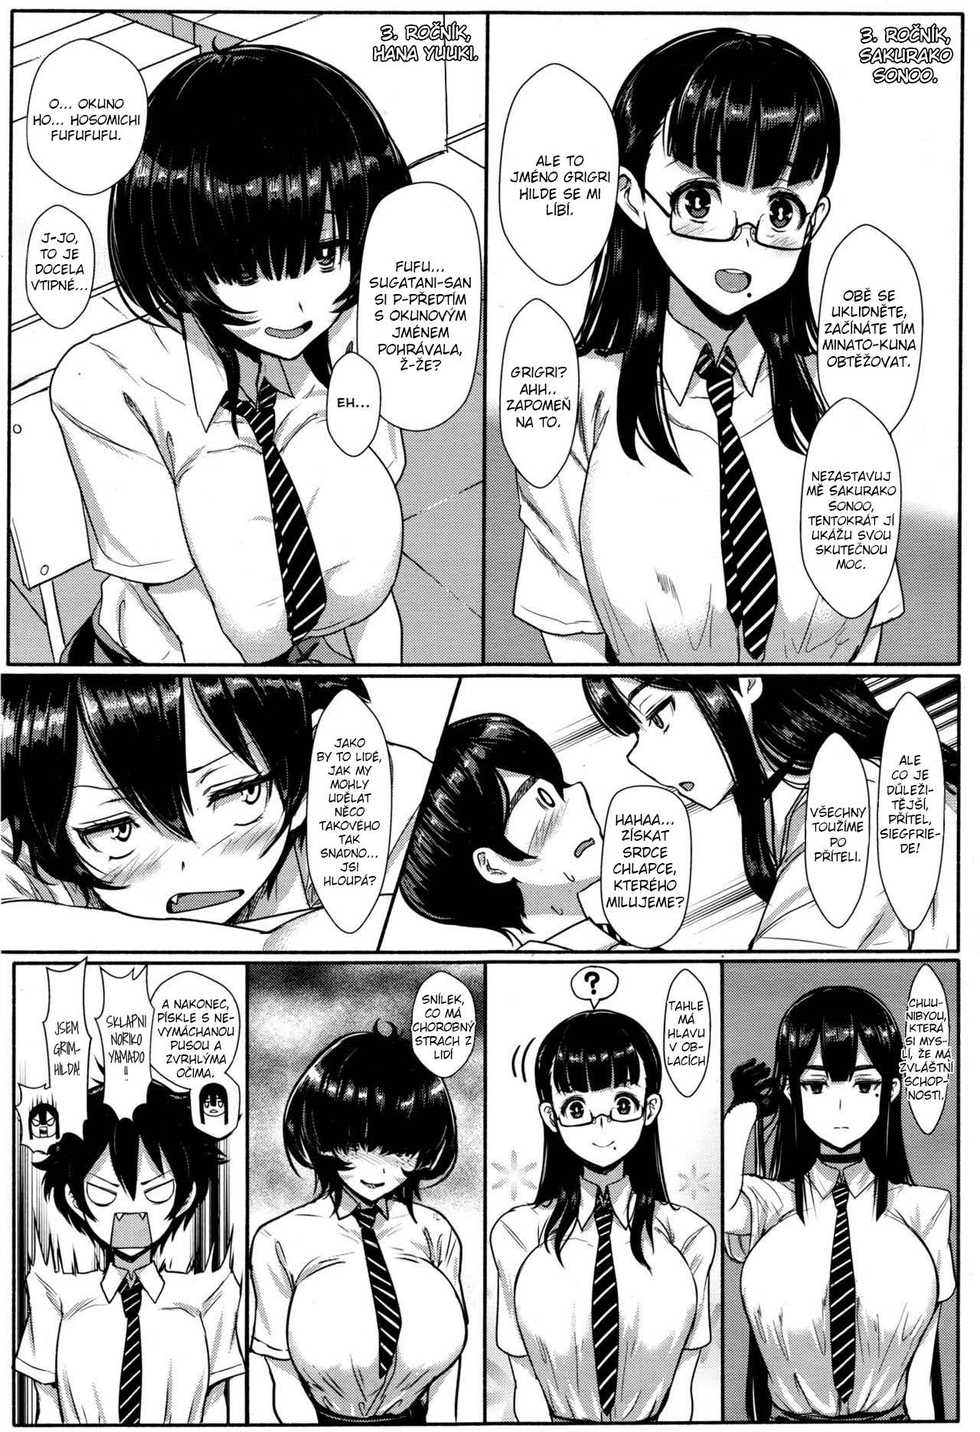 [Miyamoto Issa] Hikage no Sono e Youkoso | Welcome to the Shadow Garden (Girls forM Vol. 12) [Czech] [Heart♥] - Page 3